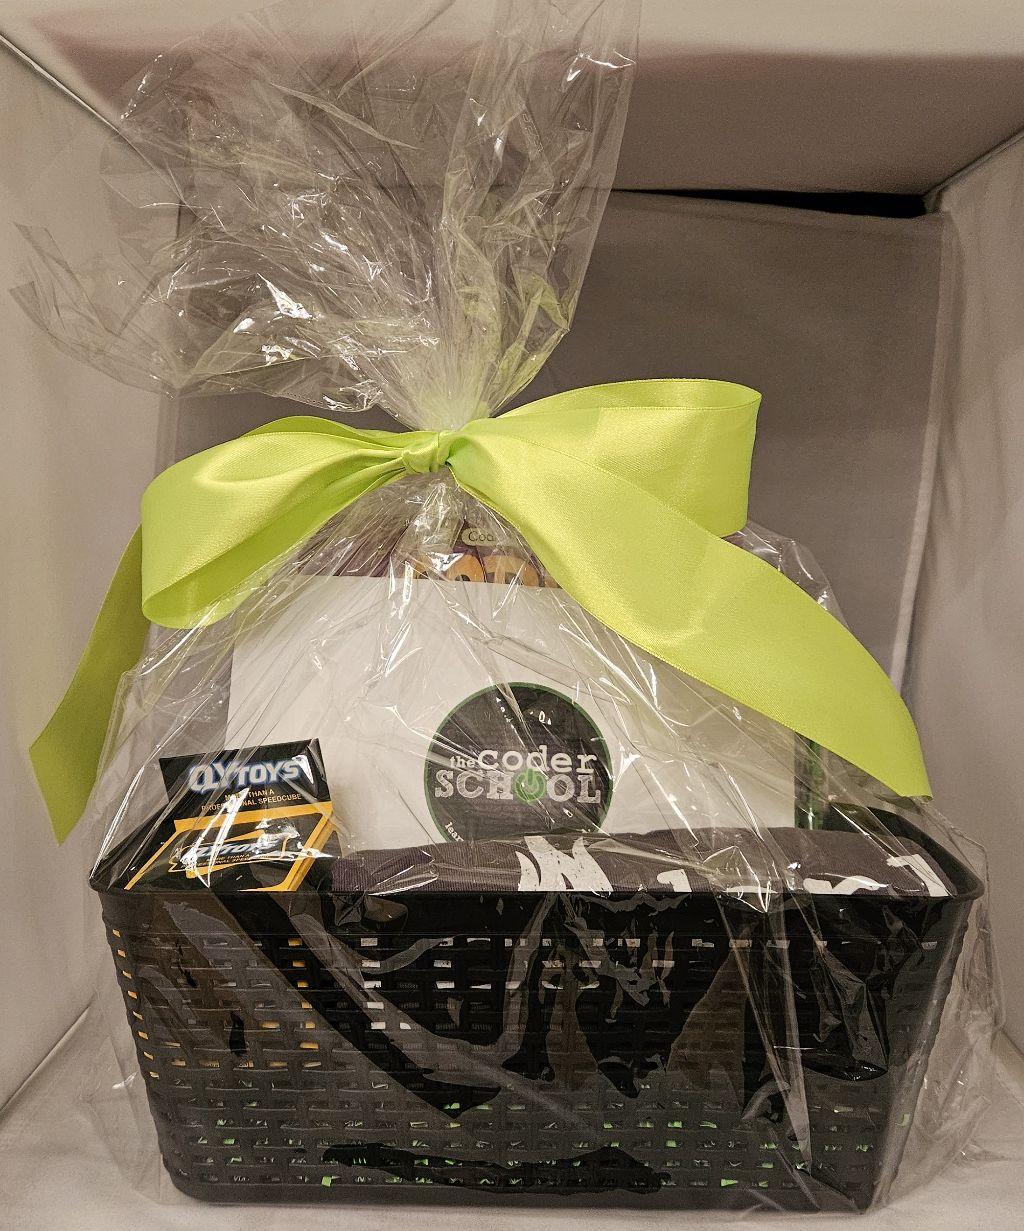 The Coder School - One Week Summer Camp and gift basket